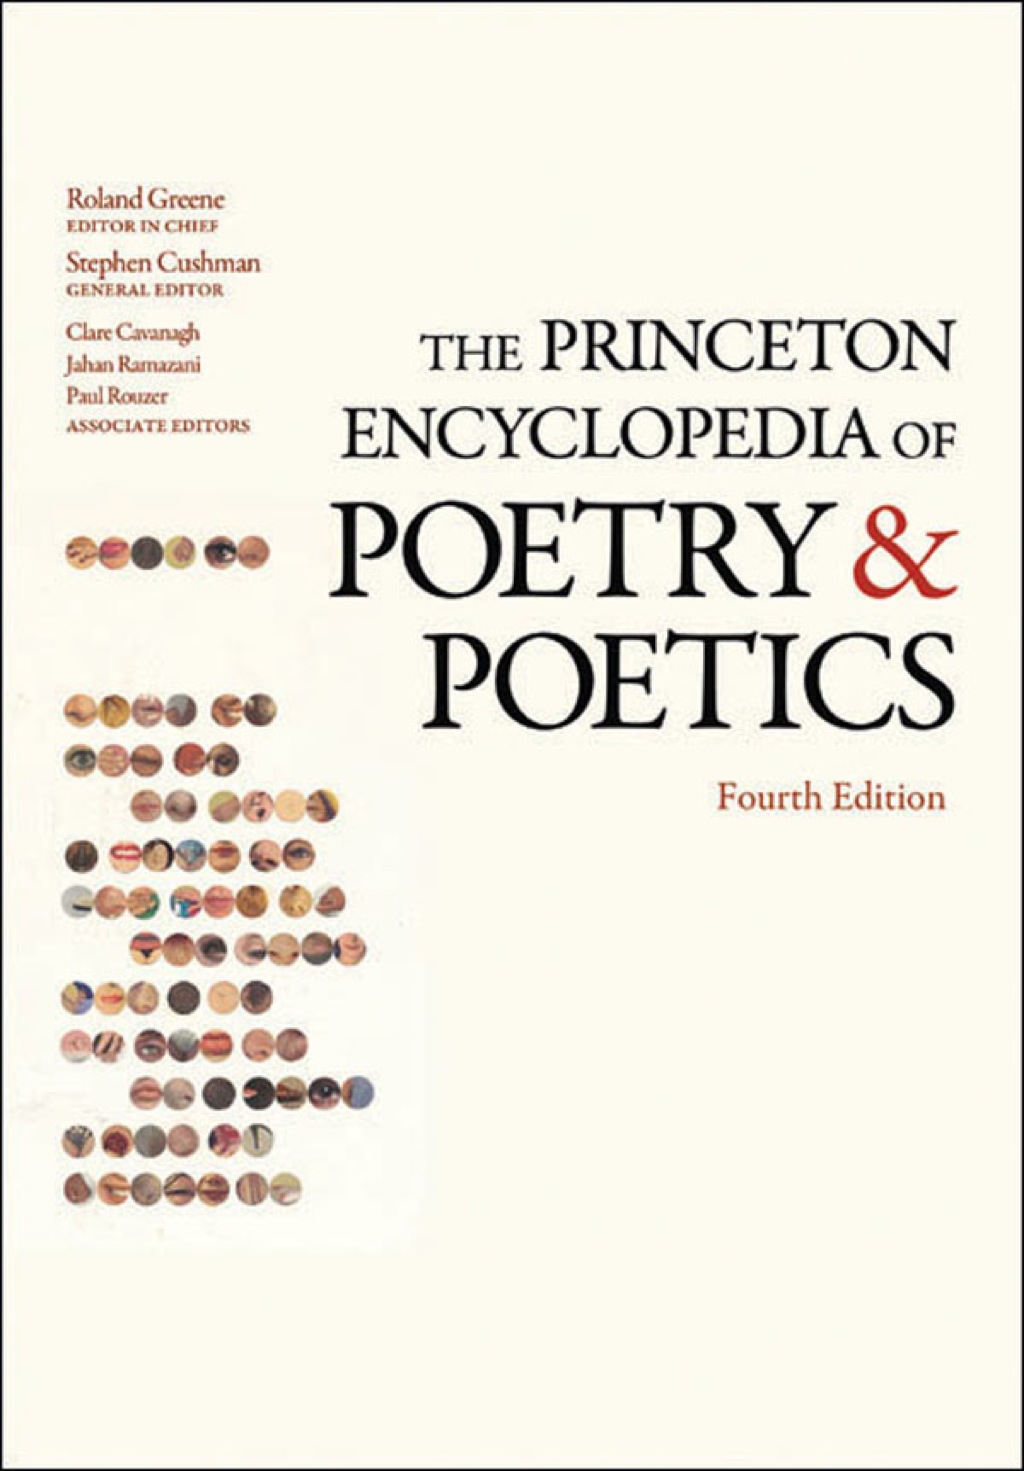 The Princeton Encyclopedia of Poetry and Poetics - 4th Edition (eBook Rental)